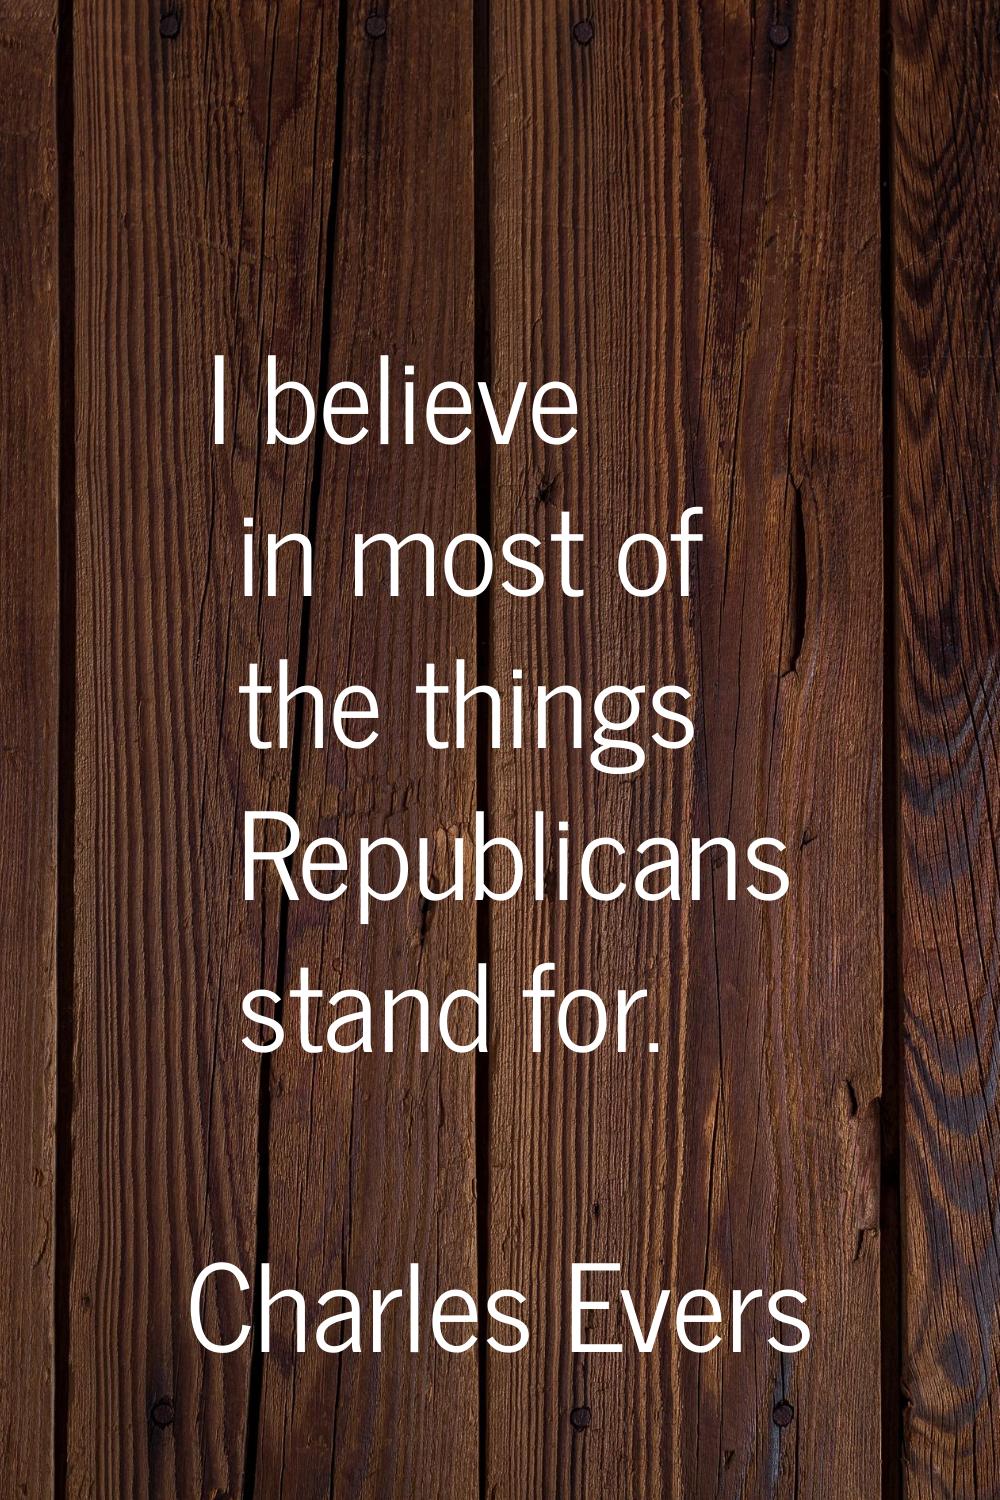 I believe in most of the things Republicans stand for.